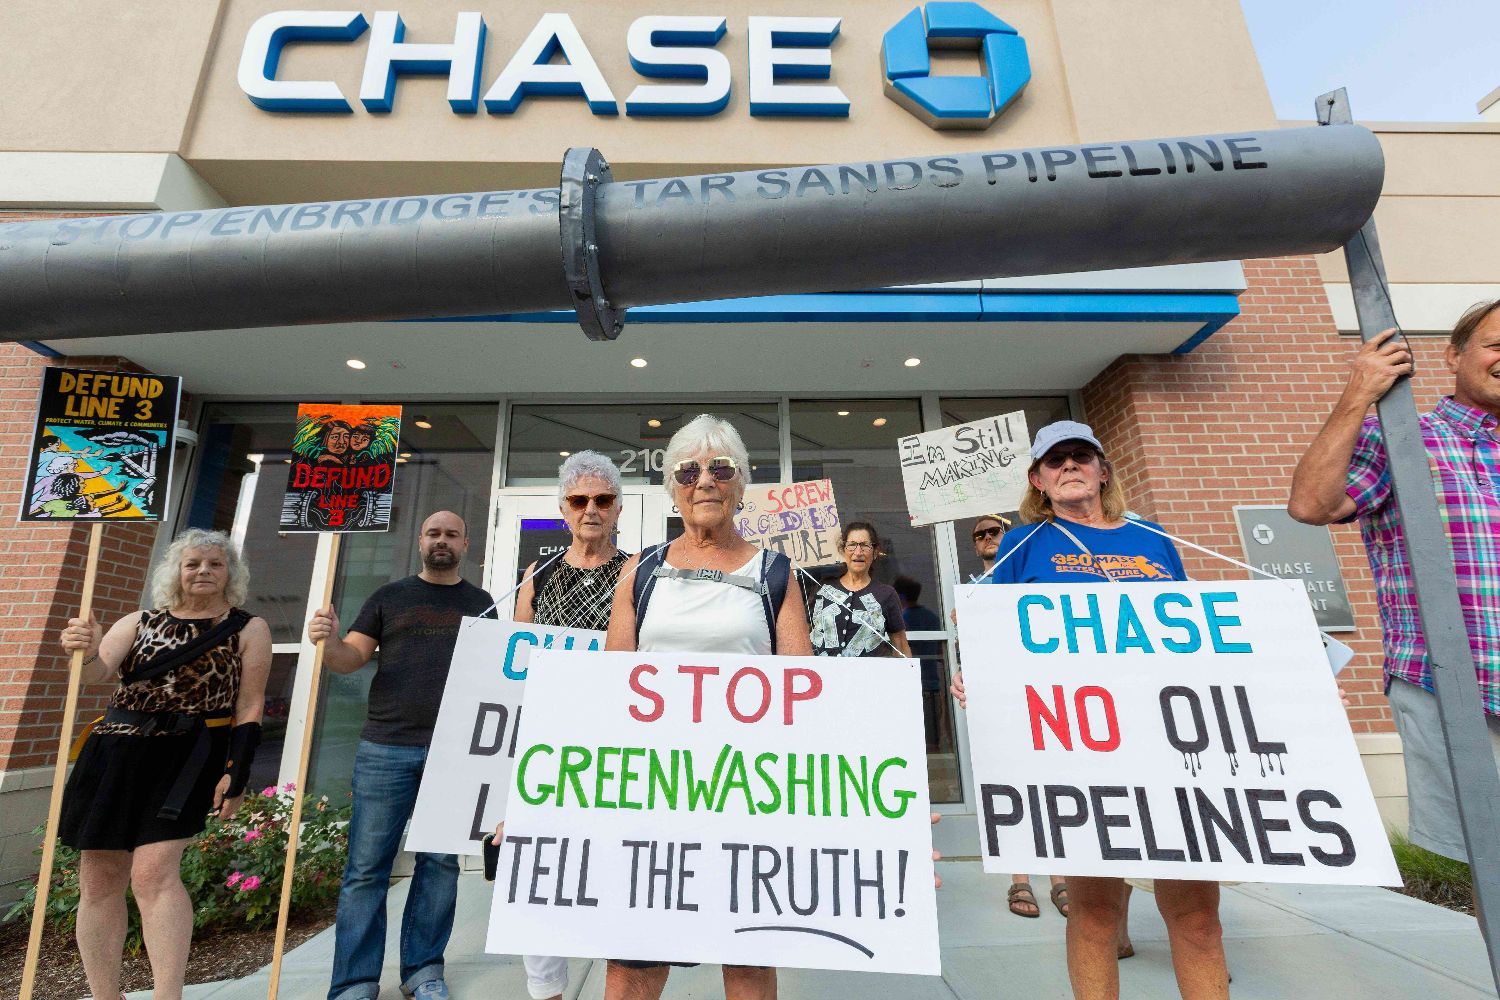 People protest Chase Bank funding climate chaos